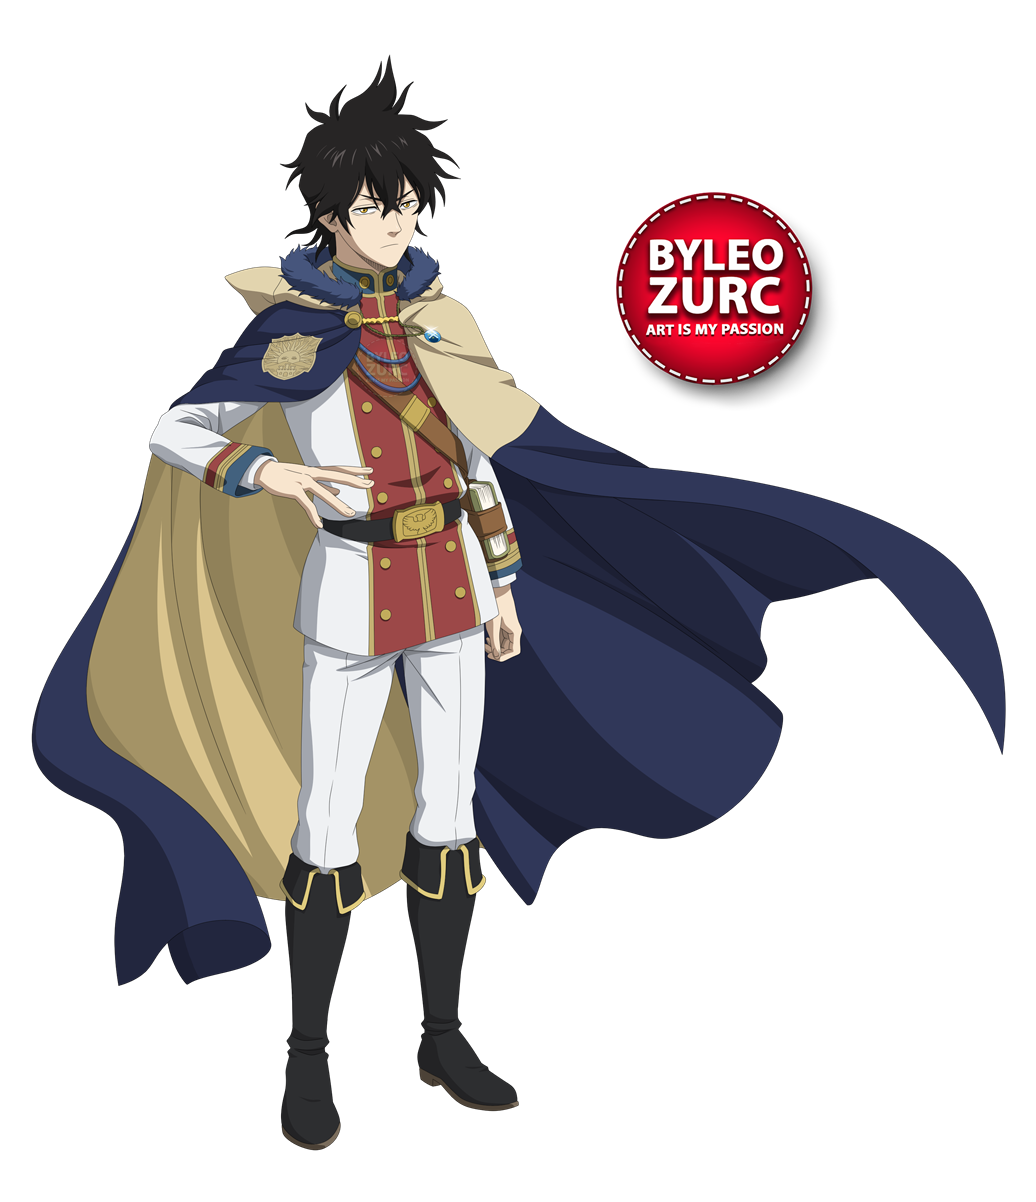 Black Clover Characters Yuno, HD Png Download is free transparent